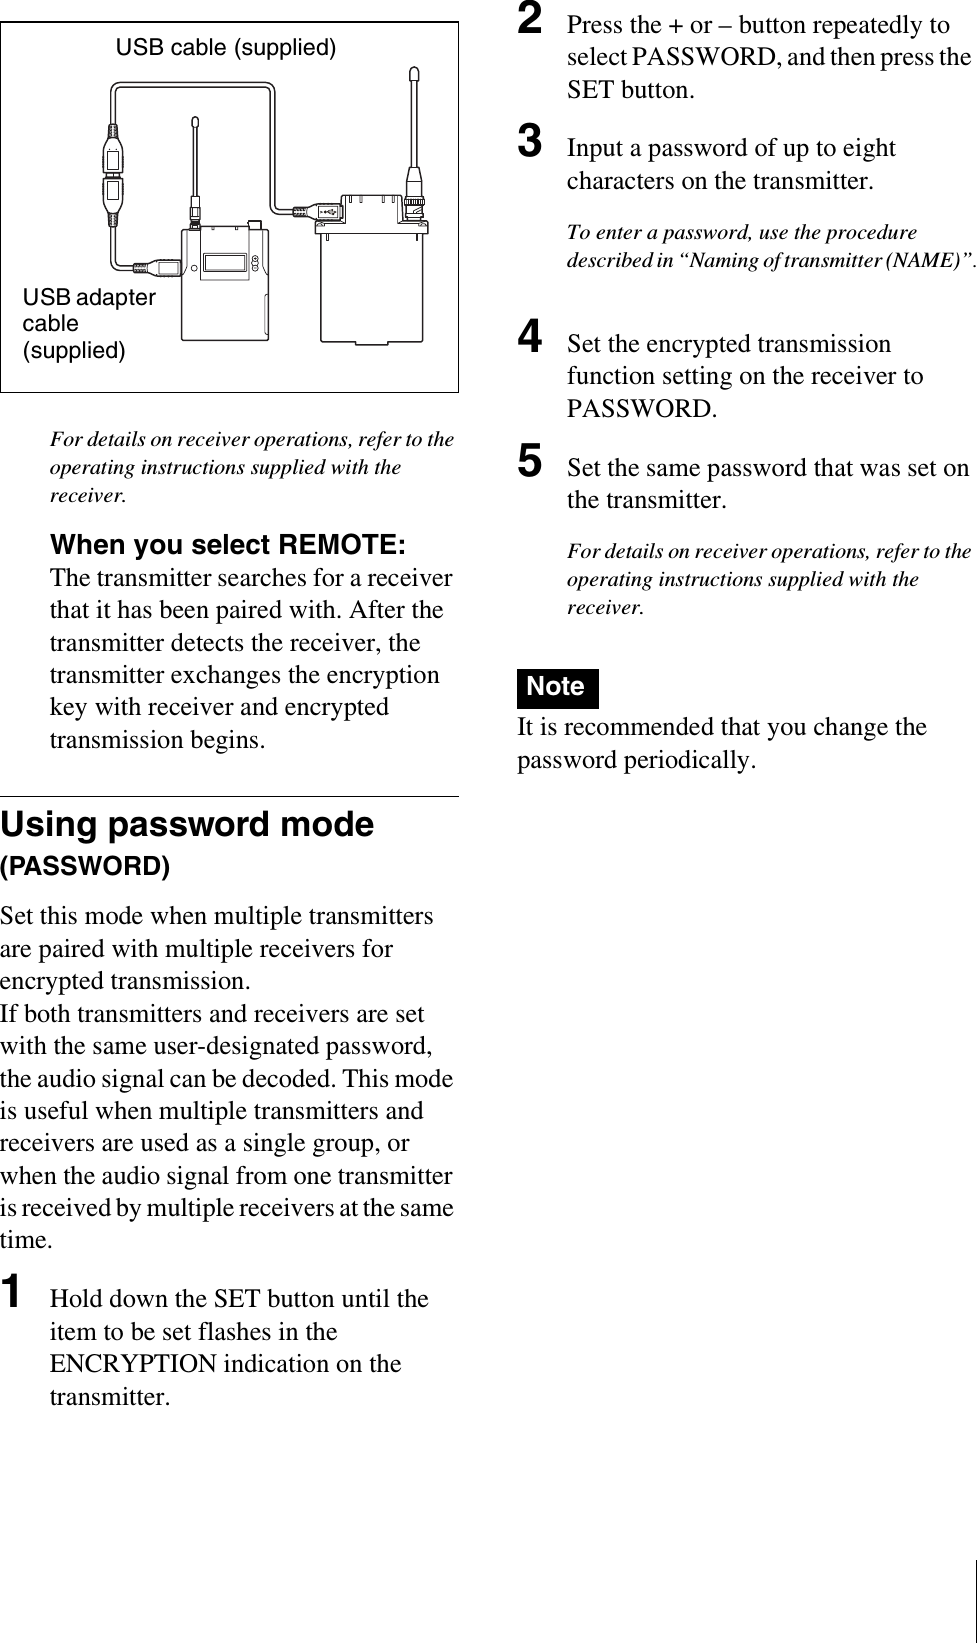 For details on receiver operations, refer to the operating instructions supplied with the receiver.When you select REMOTE: The transmitter searches for a receiver that it has been paired with. After the transmitter detects the receiver, the transmitter exchanges the encryption key with receiver and encrypted transmission begins.Using password mode (PASSWORD)Set this mode when multiple transmitters are paired with multiple receivers for encrypted transmission.If both transmitters and receivers are set with the same user-designated password, the audio signal can be decoded. This mode is useful when multiple transmitters and receivers are used as a single group, or when the audio signal from one transmitter is received by multiple receivers at the same time.1Hold down the SET button until the item to be set flashes in the ENCRYPTION indication on the transmitter.2Press the + or – button repeatedly to select PASSWORD, and then press the SET button.3Input a password of up to eight characters on the transmitter.To enter a password, use the procedure described in “Naming of transmitter (NAME)”.4Set the encrypted transmission function setting on the receiver to PASSWORD.5Set the same password that was set on the transmitter.For details on receiver operations, refer to the operating instructions supplied with the receiver.It is recommended that you change the password periodically.USB cable (supplied)USB adapter cable (supplied)Note